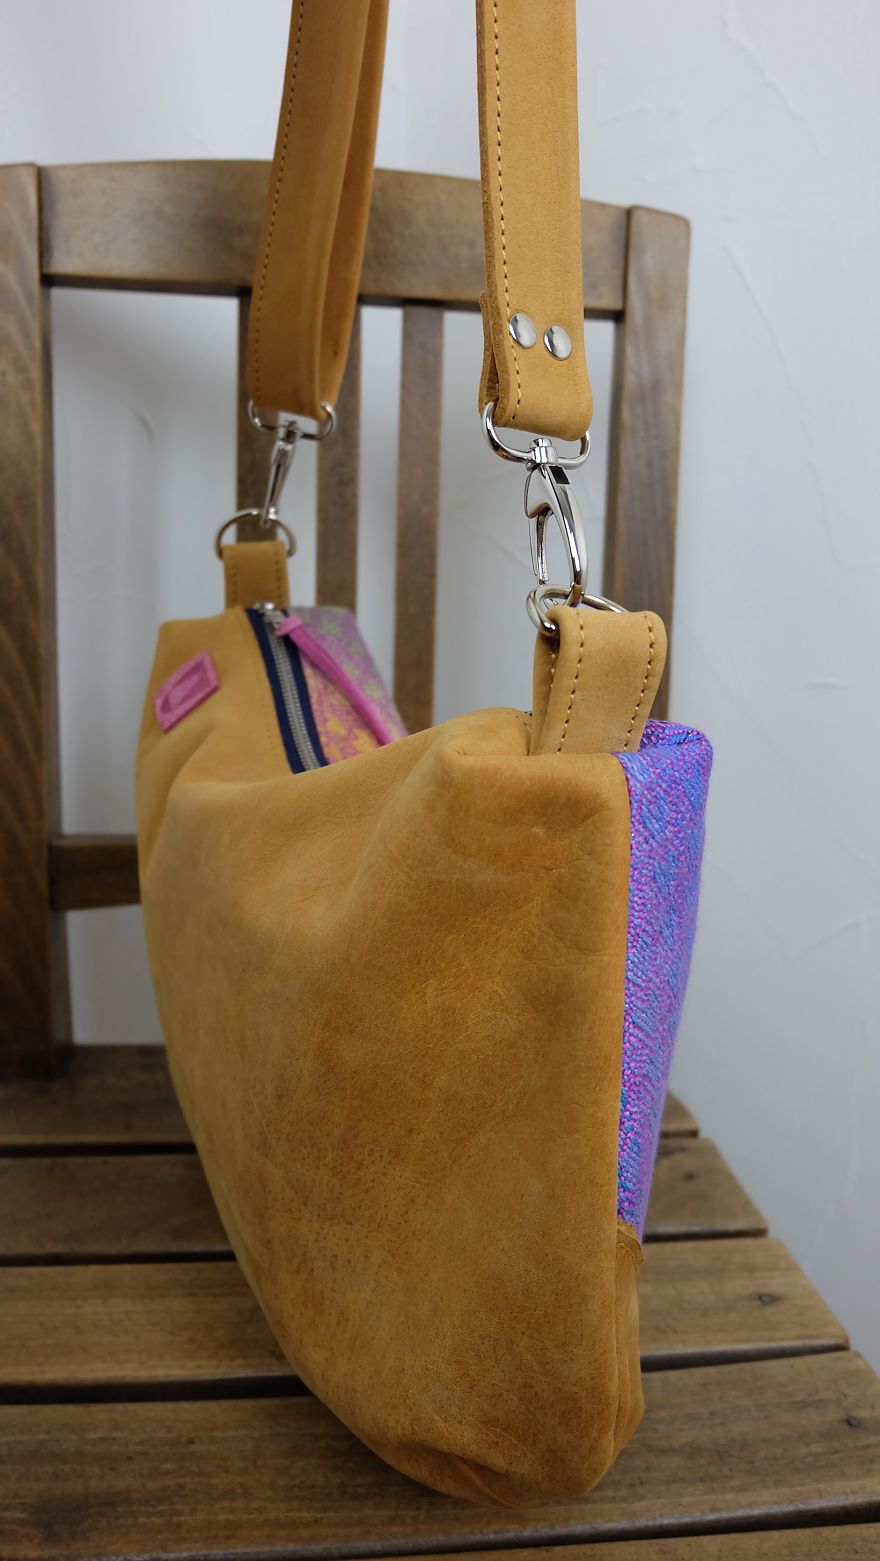 Handcrafted Unique Moonbag Made Of Genuine Leather And A Handwoven Piece Of A Babywrap